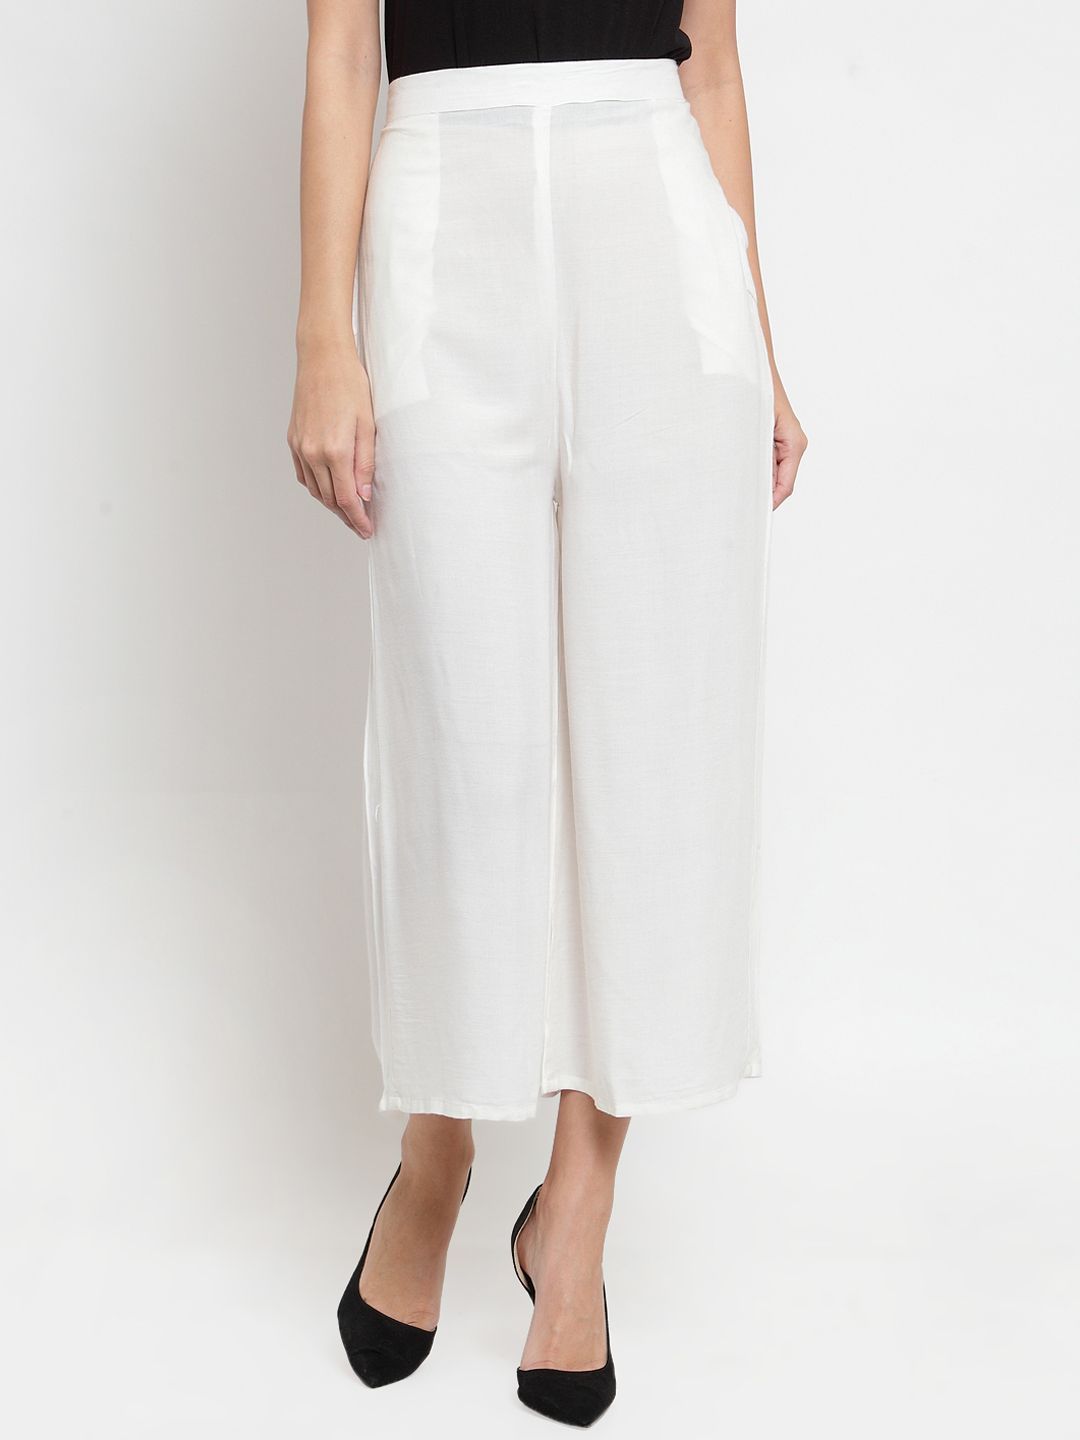 Clora Creation Women Off-White Regular Fit Solid Culottes Price in India